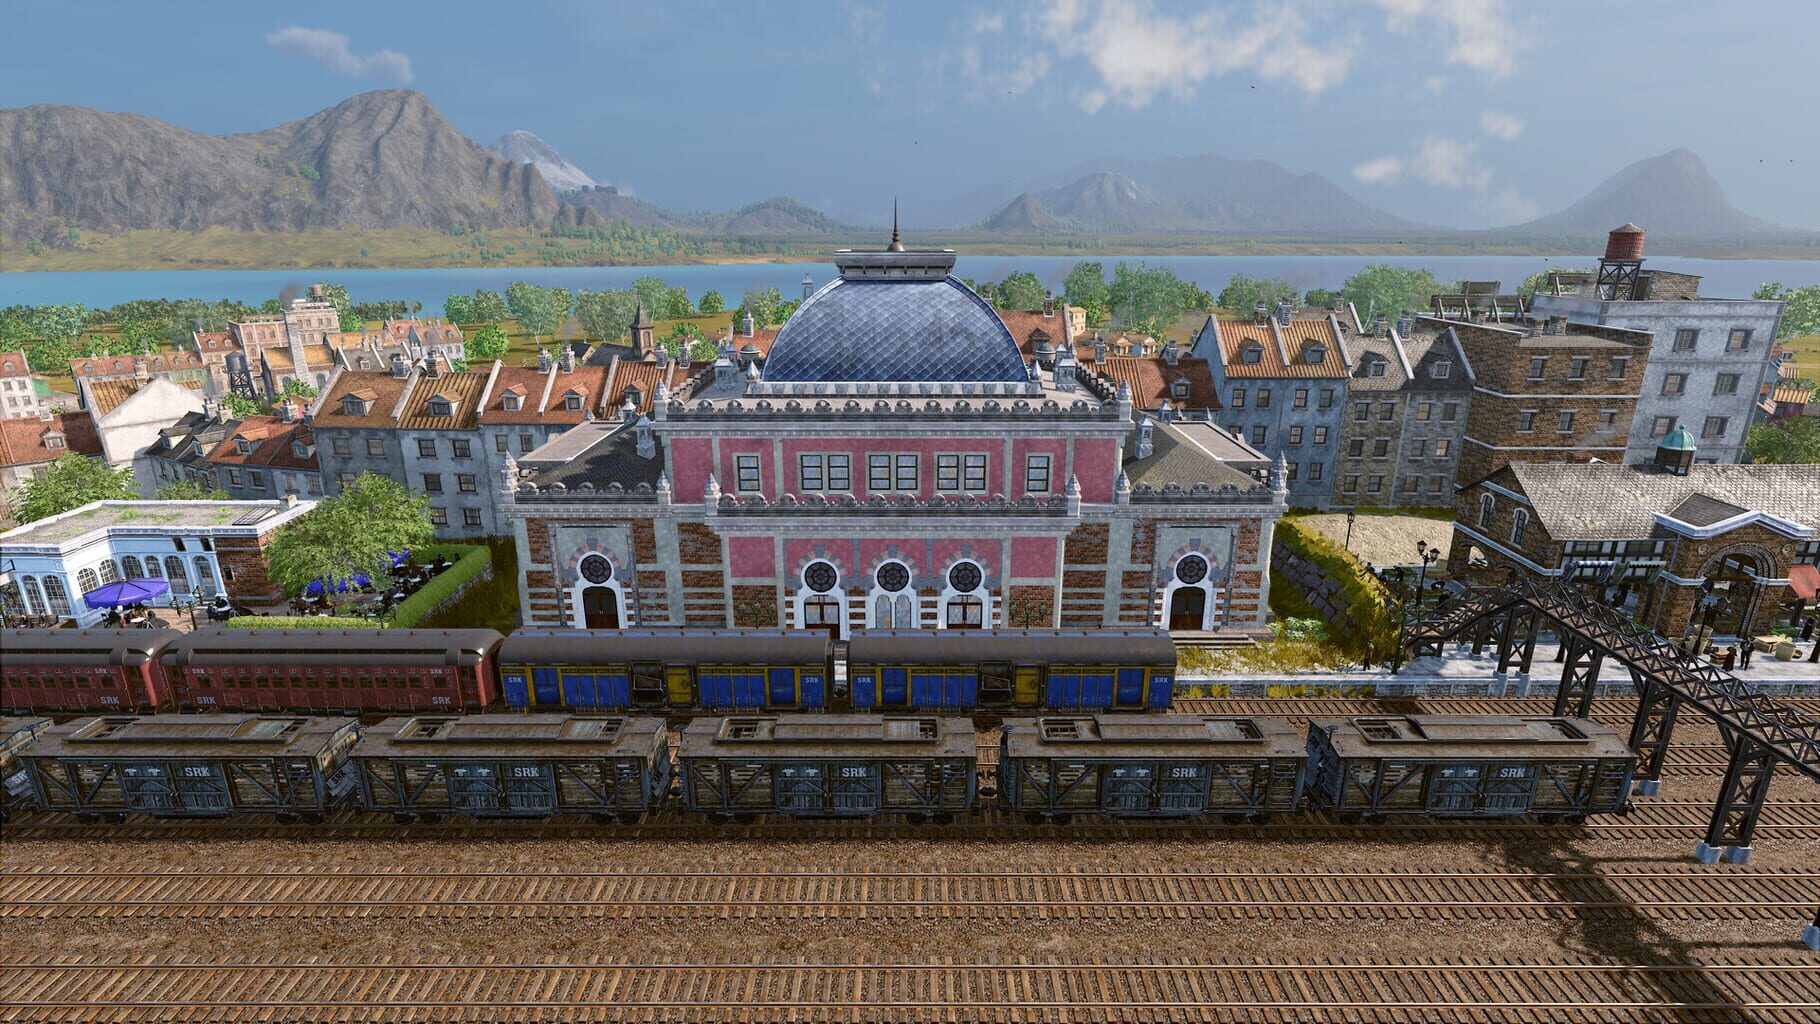 Railway Empire 2: Journey To The East Image